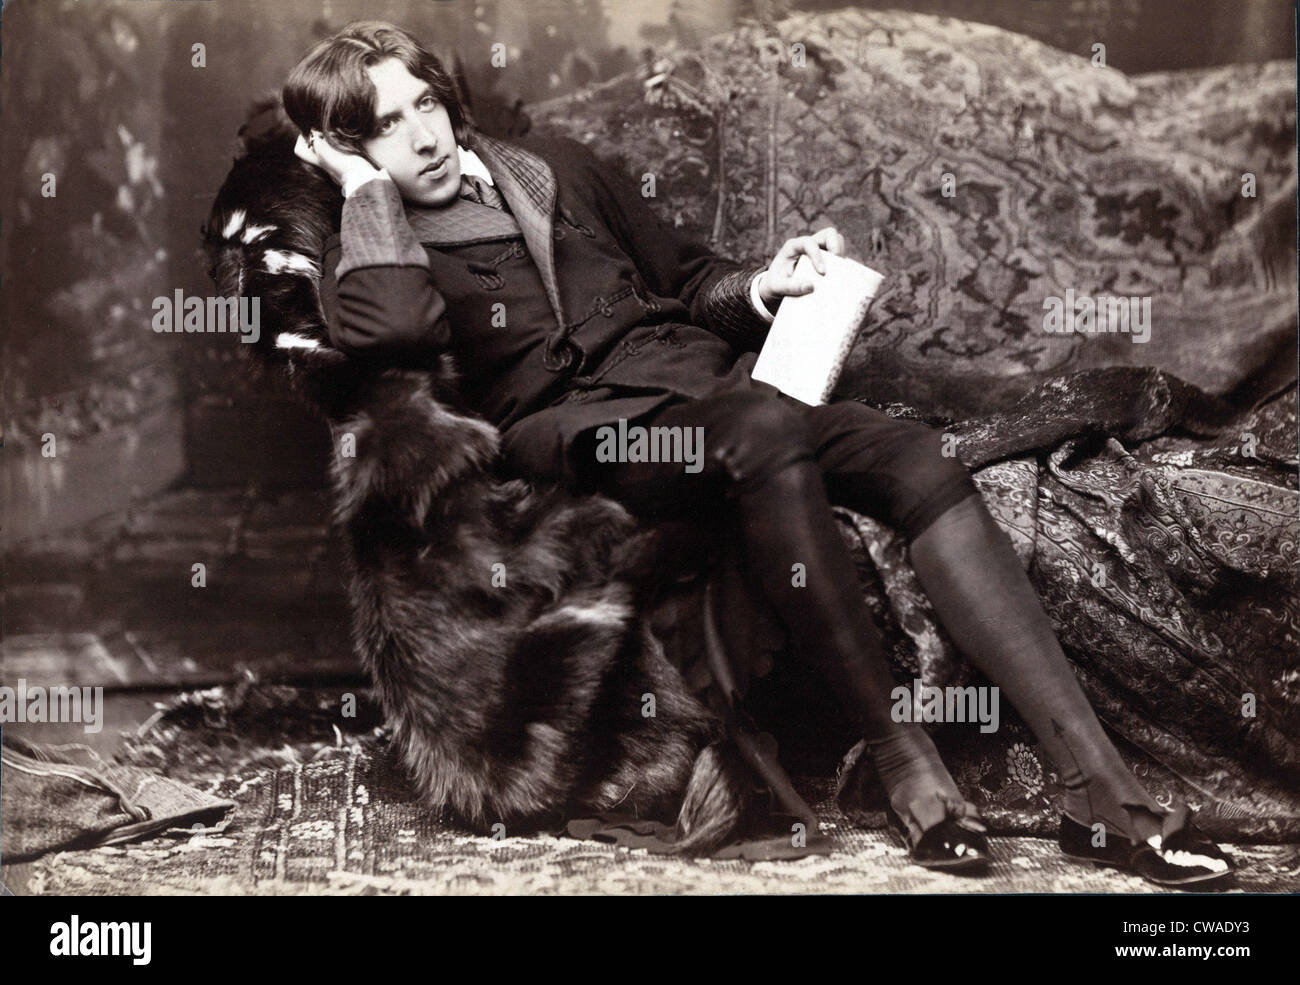 Oscar Wilde, (1854-1900) Irish literary   author of, THE PORTRAIT OF DORIAN GRAY (1891), LADY WINDERMERE'S FAN (1892), and THE Stock Photo